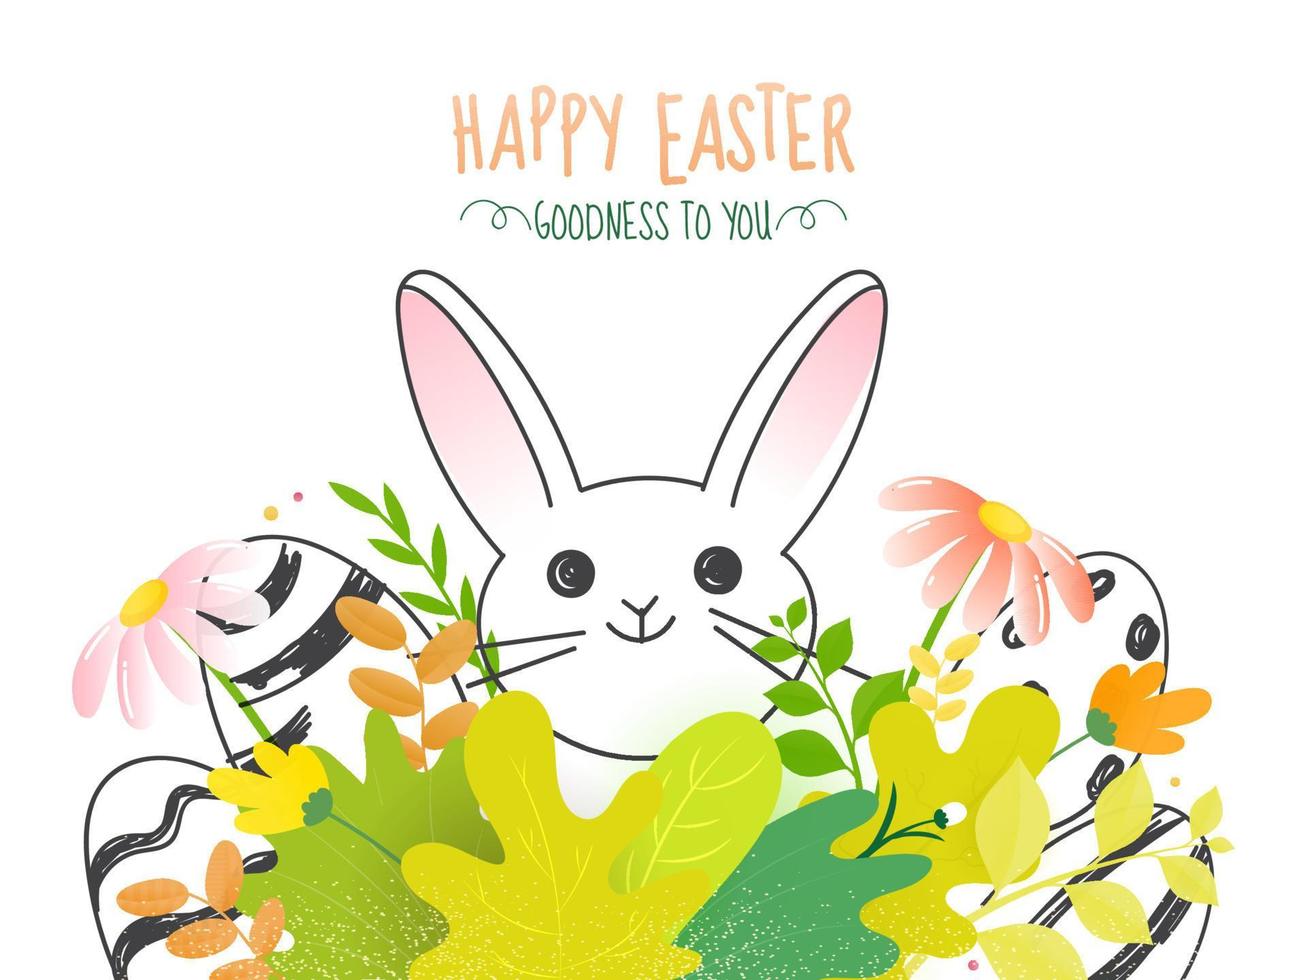 Cartoon Bunny Face with Eggs, Flowers and Leaves on White Background for Happy Easter, Goodness To You. vector